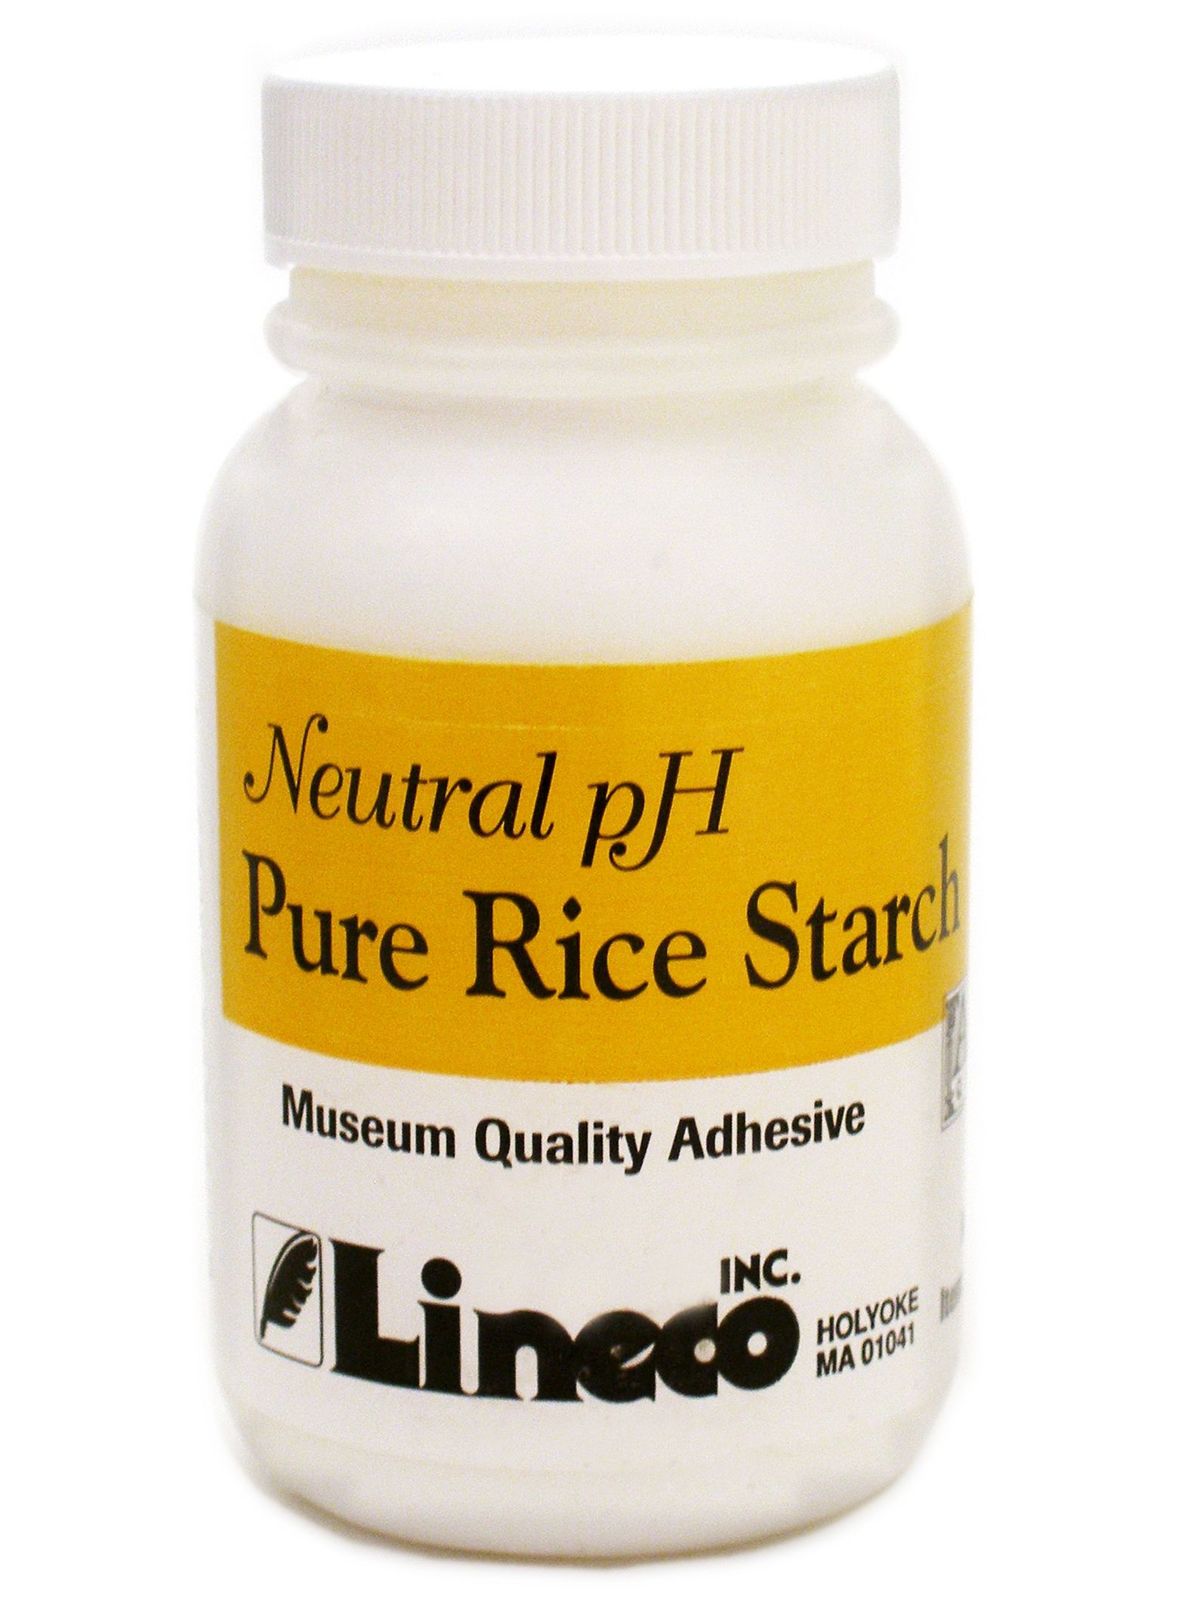 Pure Rice Starch Adhesive 2 Oz. Bottle